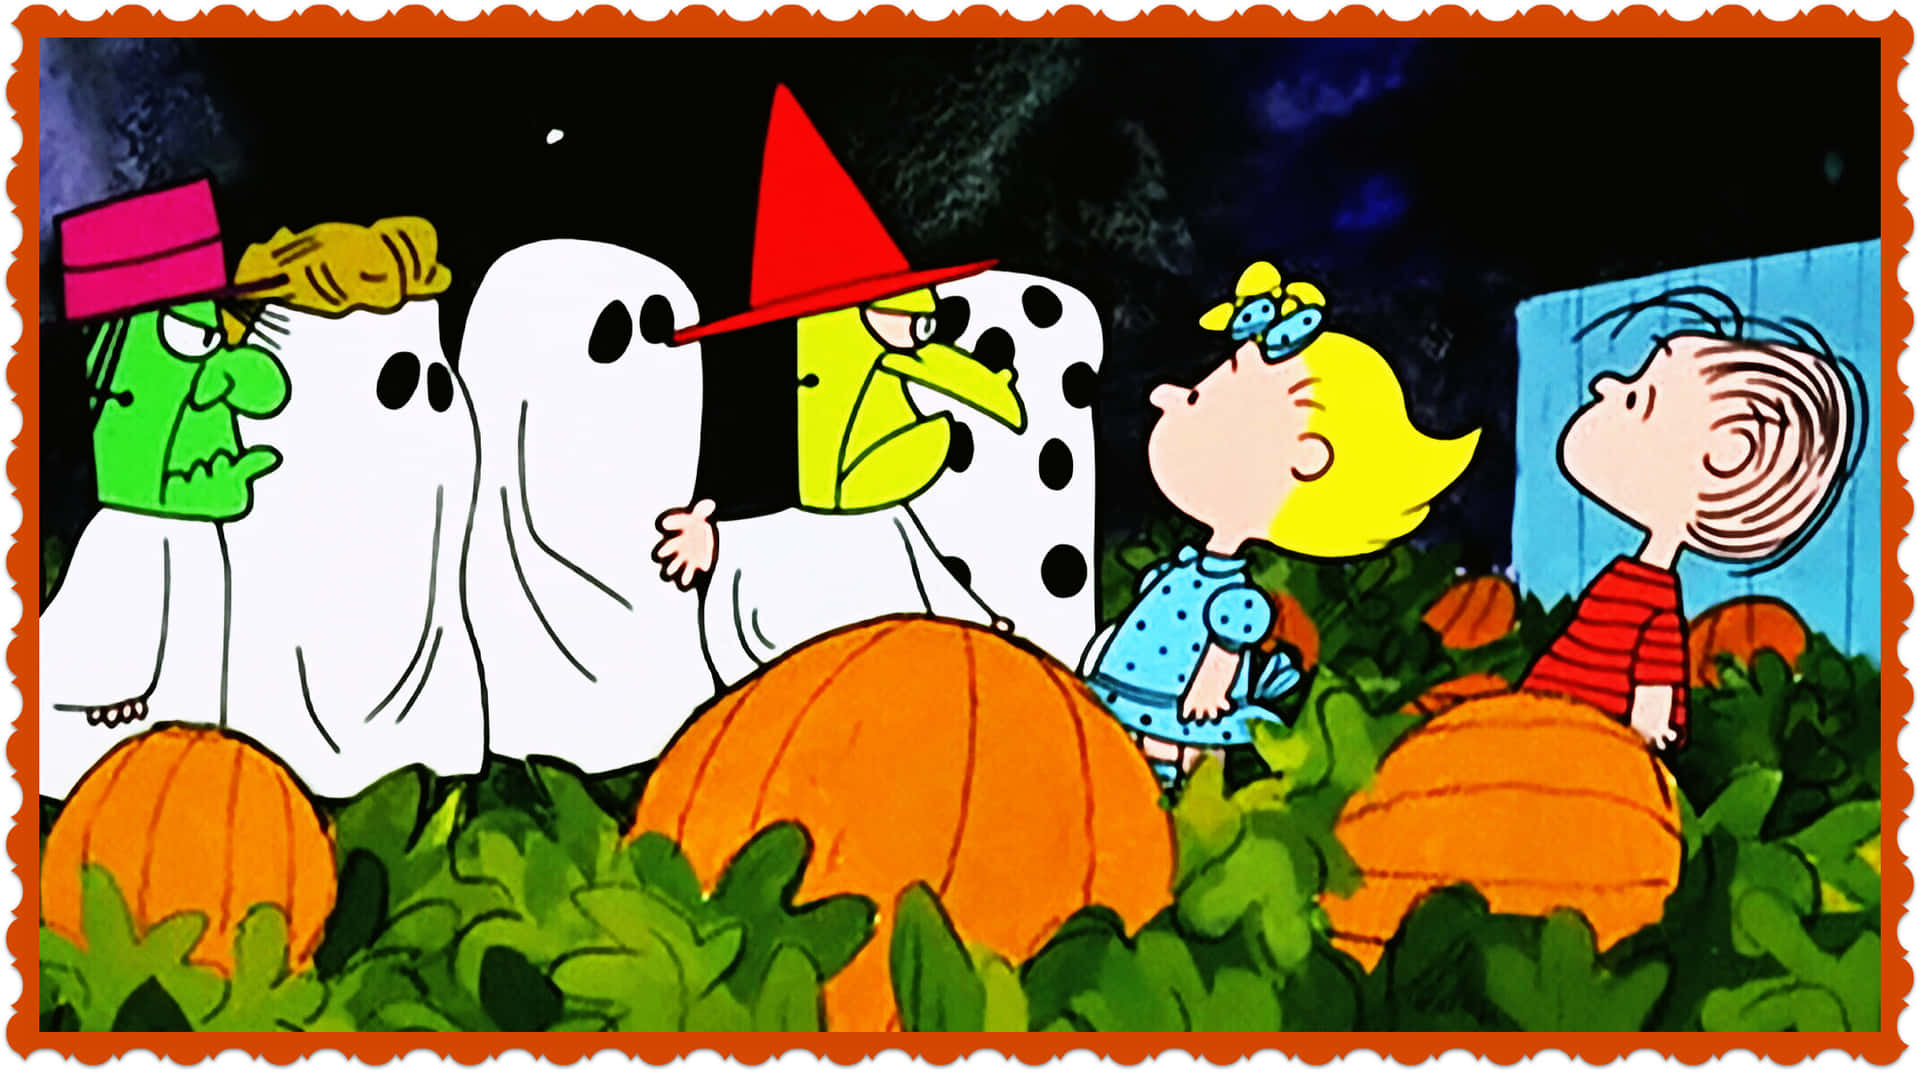 Celebrating Halloween with the Peanuts gang! Wallpaper